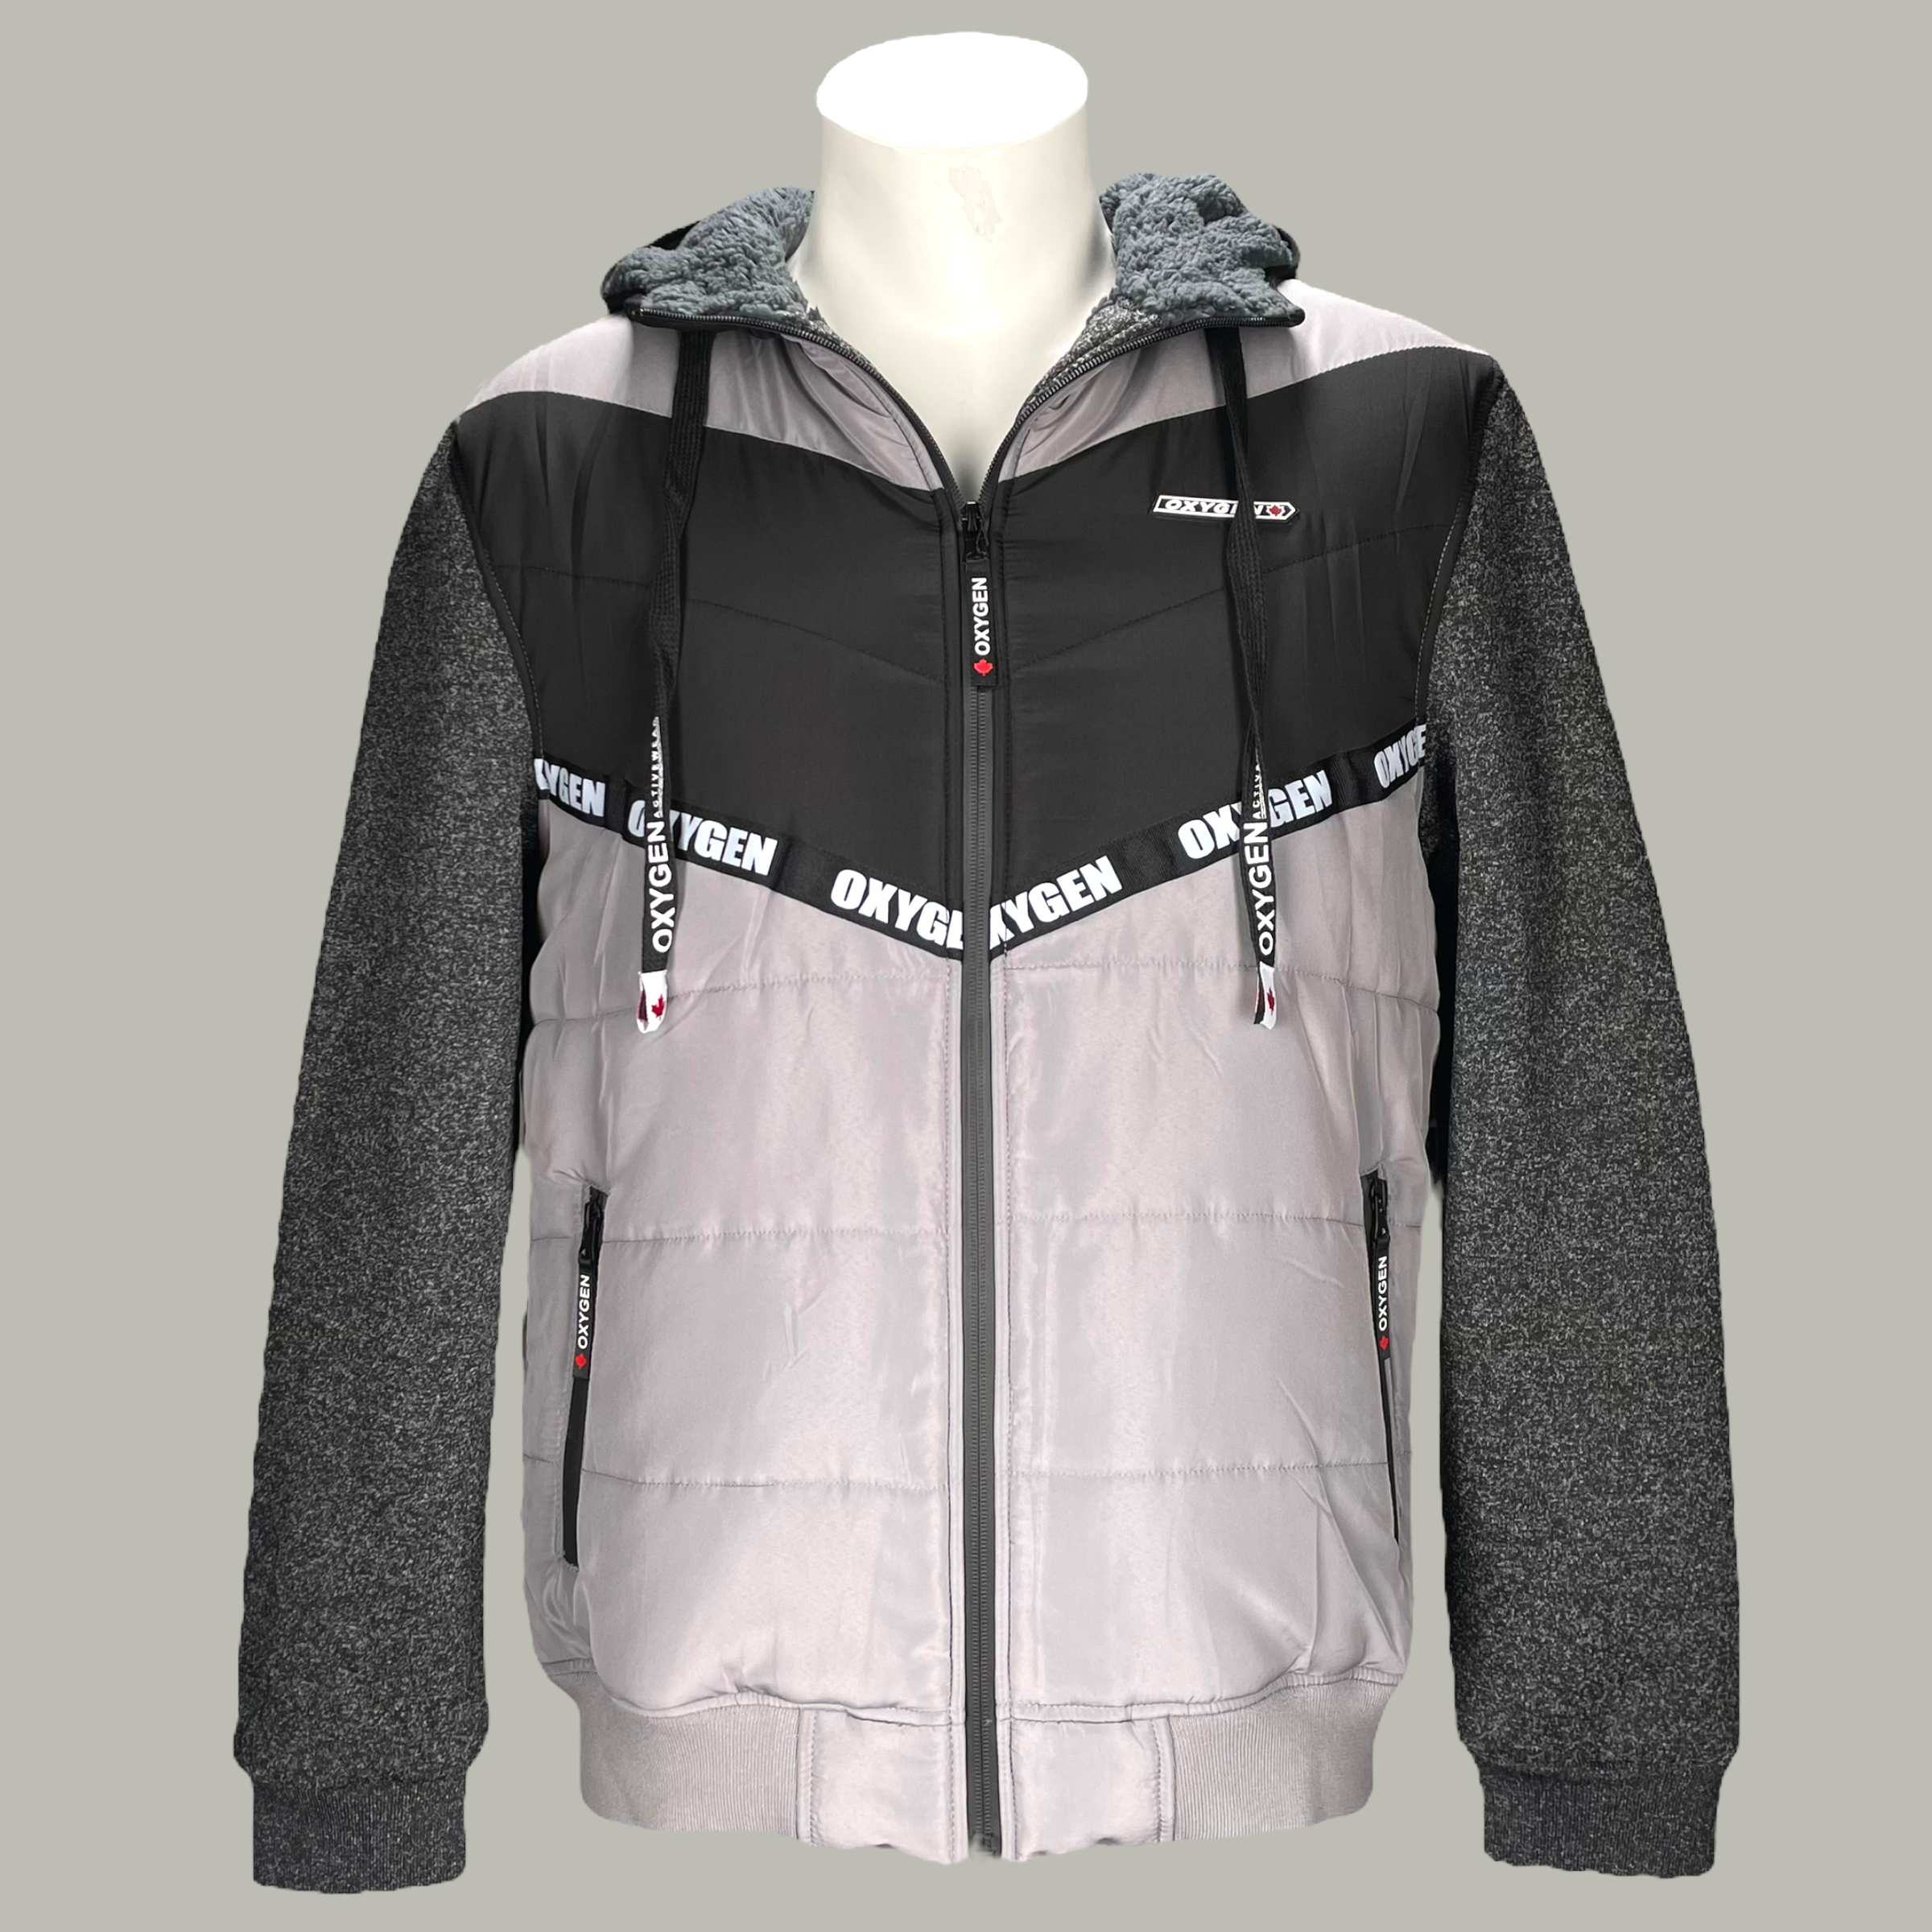 MS100-442 GREY HOODY WITH CORD